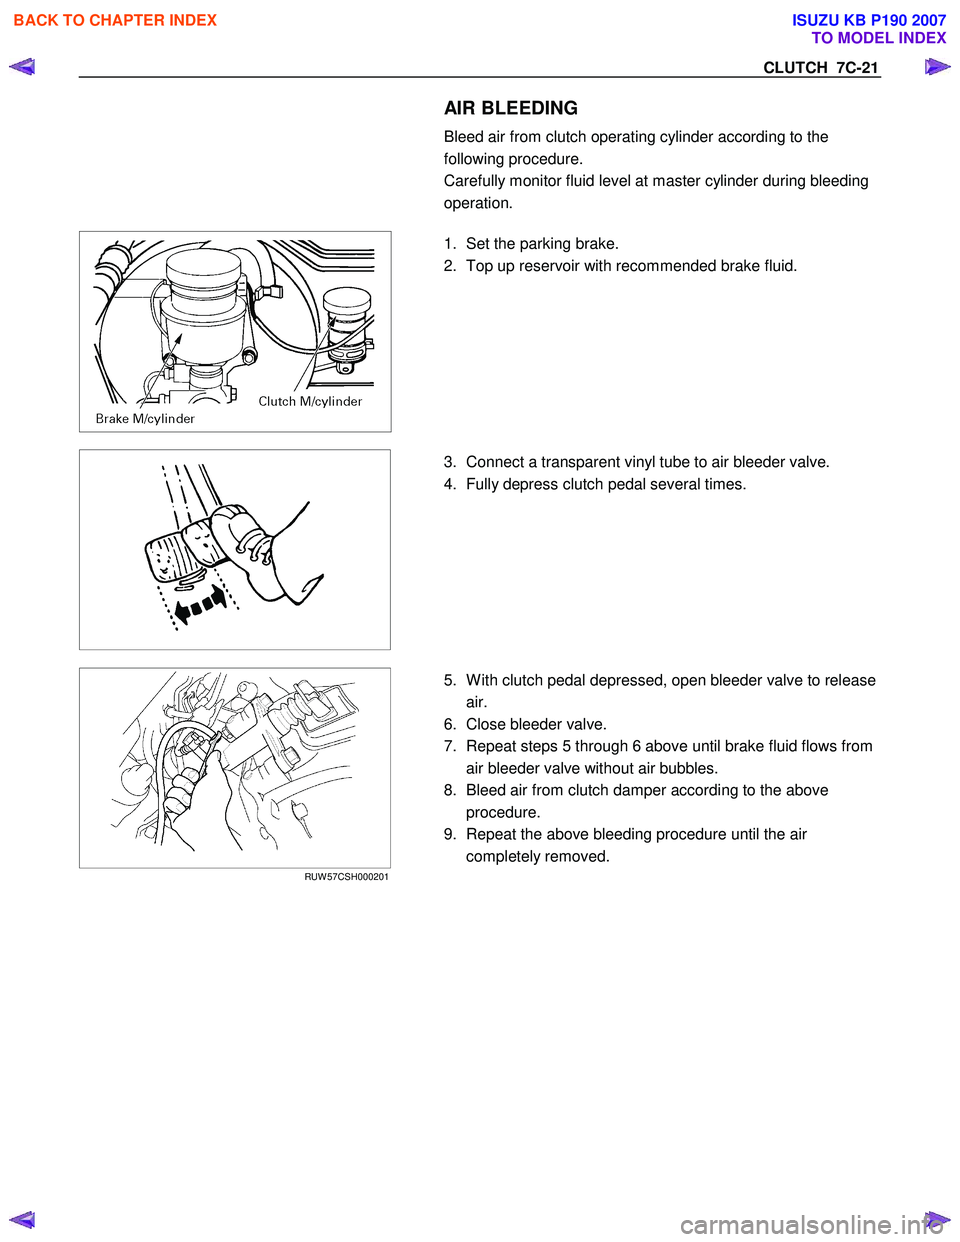 ISUZU KB P190 2007  Workshop User Guide CLUTCH  7C-21 
  AIR BLEEDING  
Bleed air from clutch operating cylinder according to the  
following procedure. 
Carefully monitor fluid level at master cylinder during bleeding 
operation. 
 
  
  1